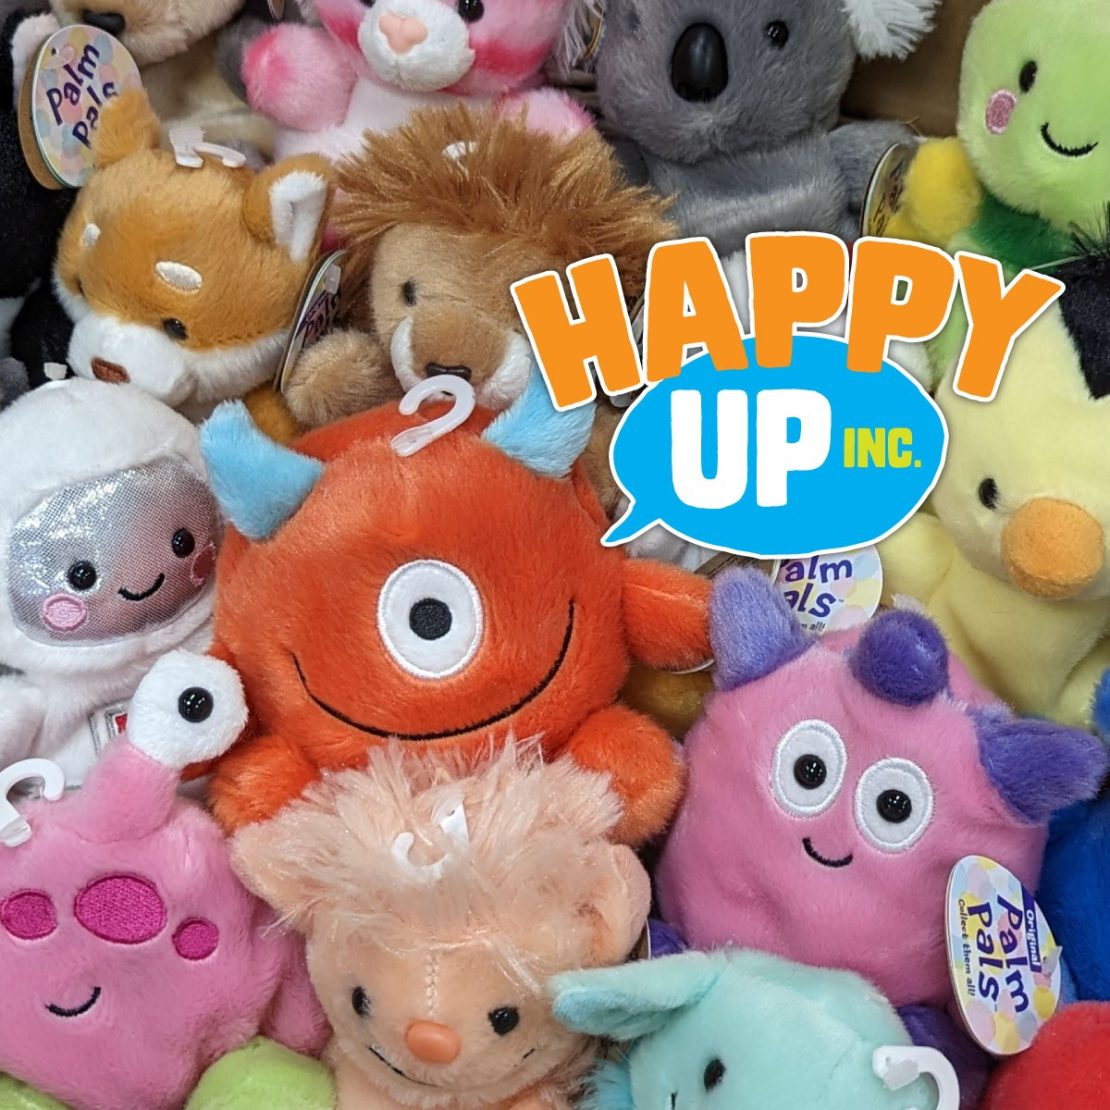 Happy Up is overflowing with Palm Pals stuffed friends!